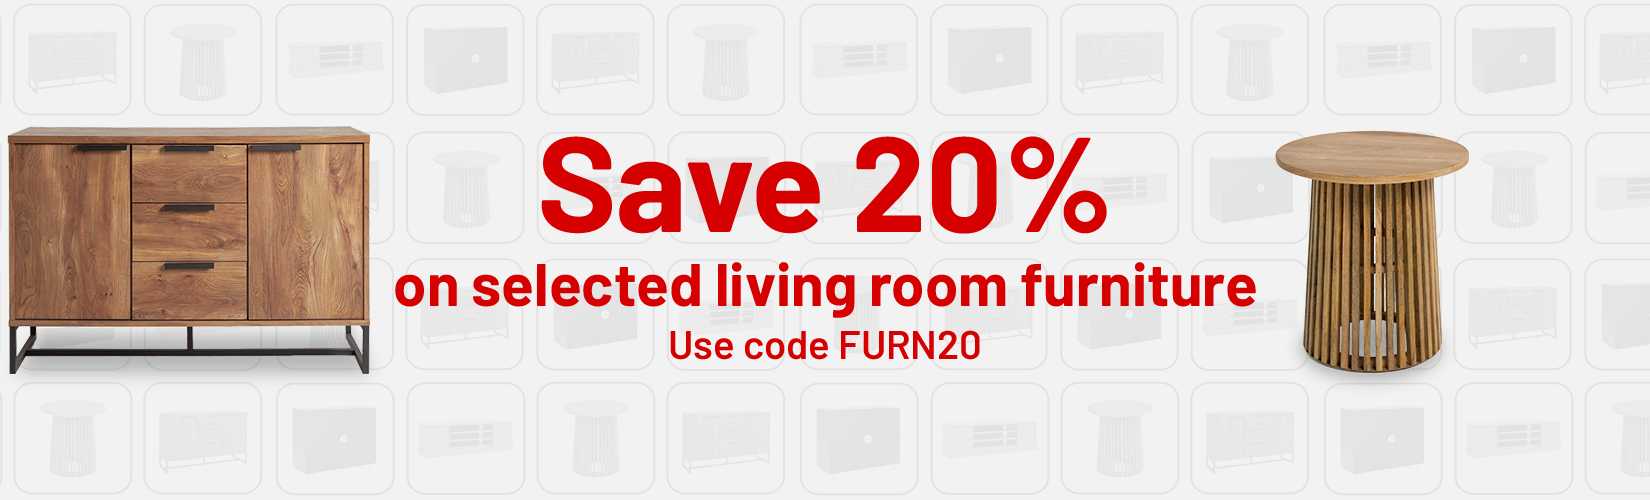 Save 20% on selected living room furniture. Use code FURN20.